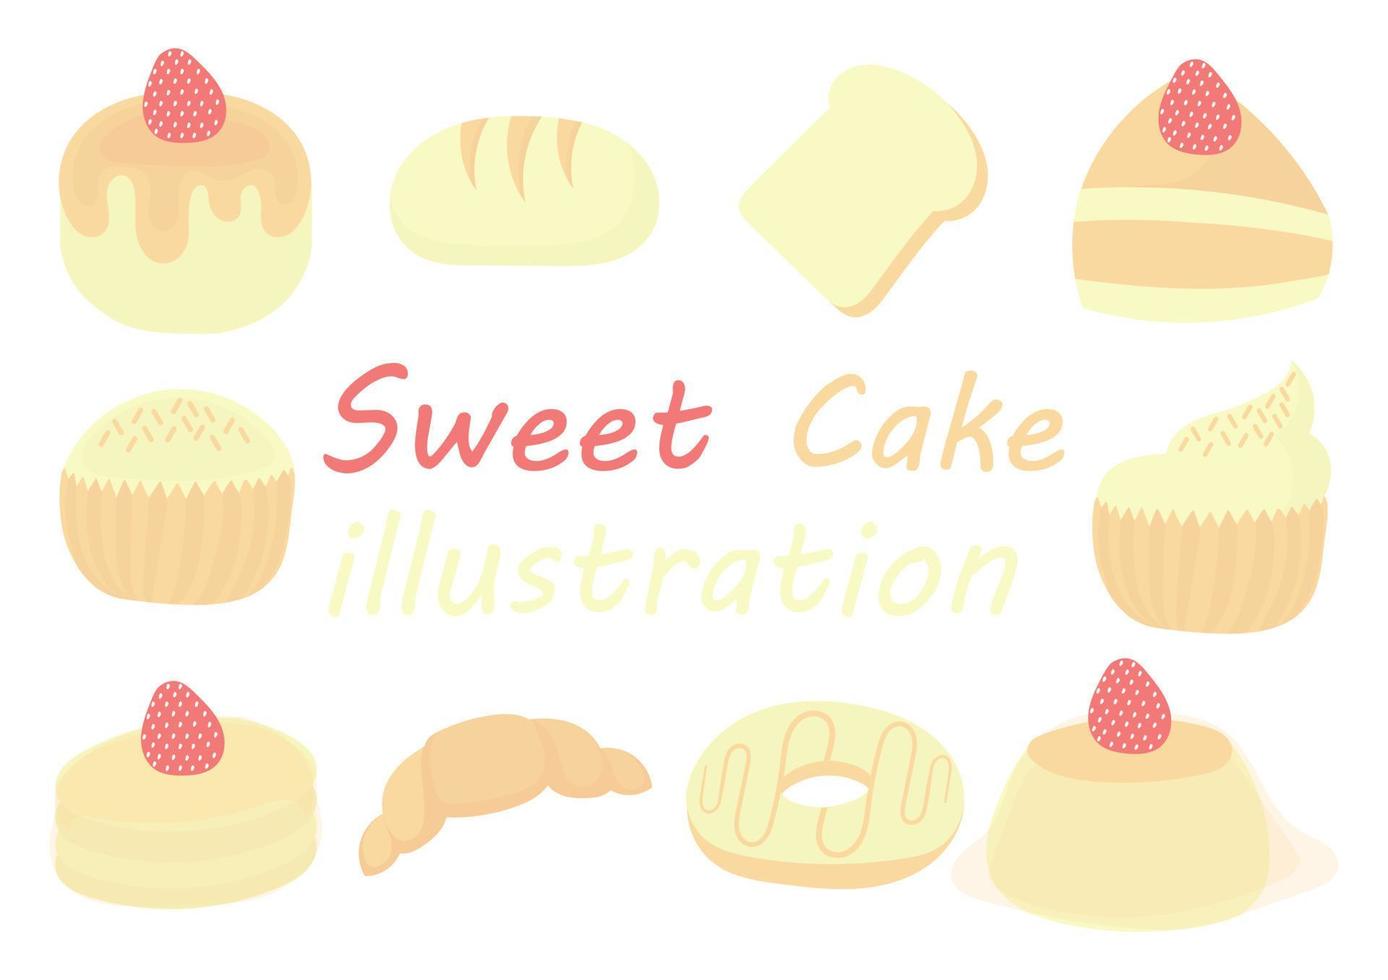 a collection of sweet cake illustrations vector